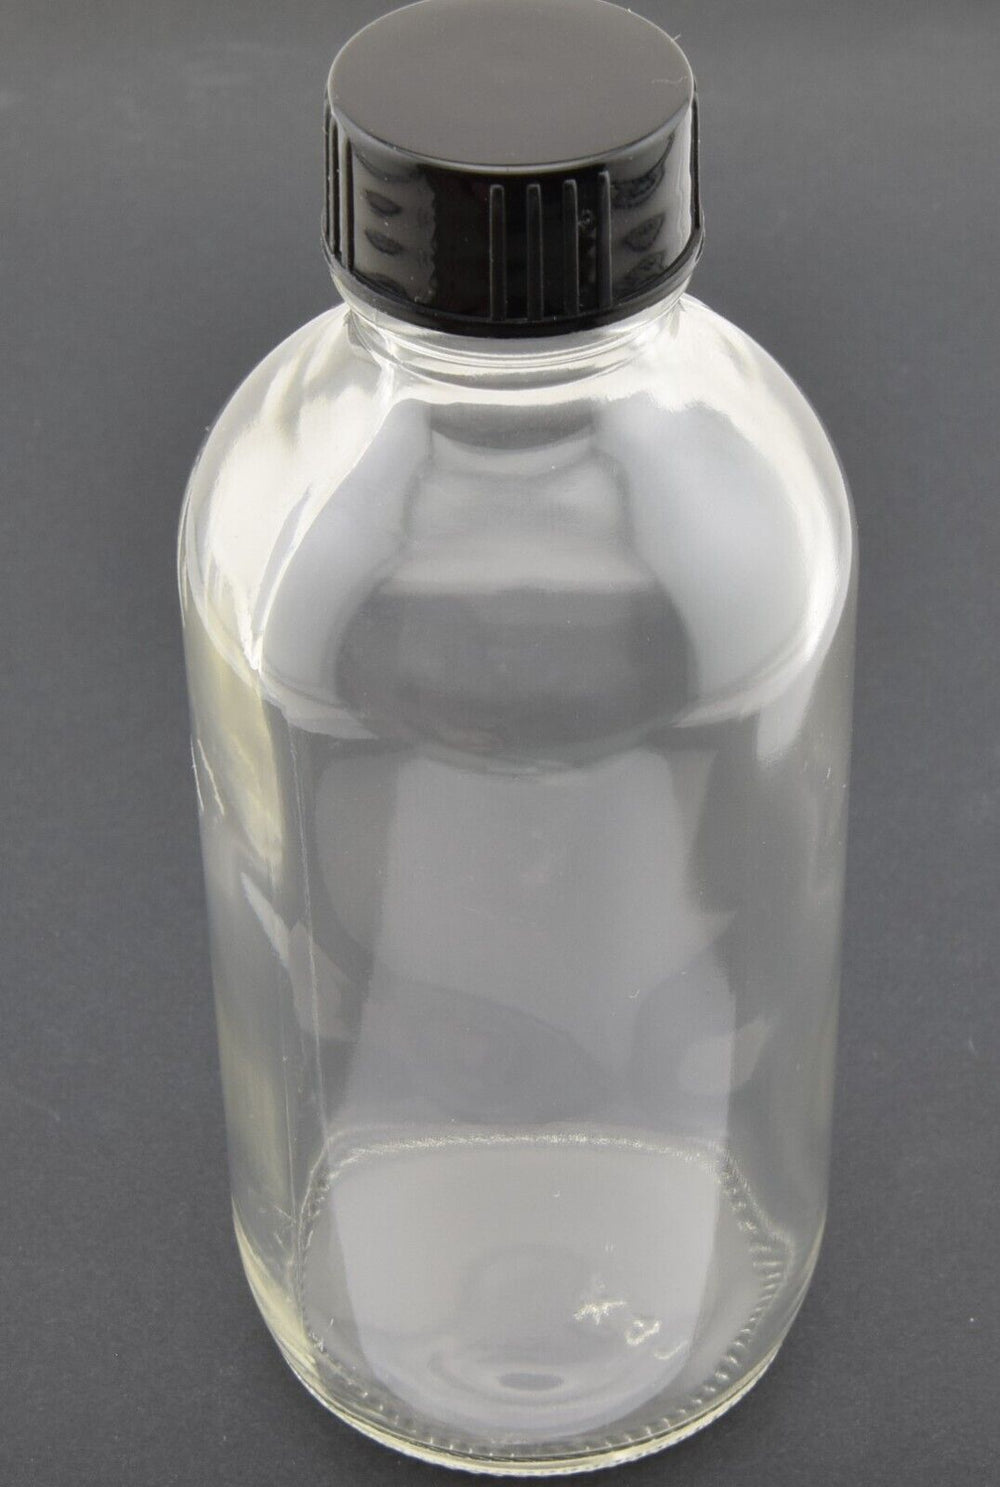 Glass Bottle with Lid Approx 4-3/4" Tall 4 Ounce - Dave's Hobby Shop by W5SWL